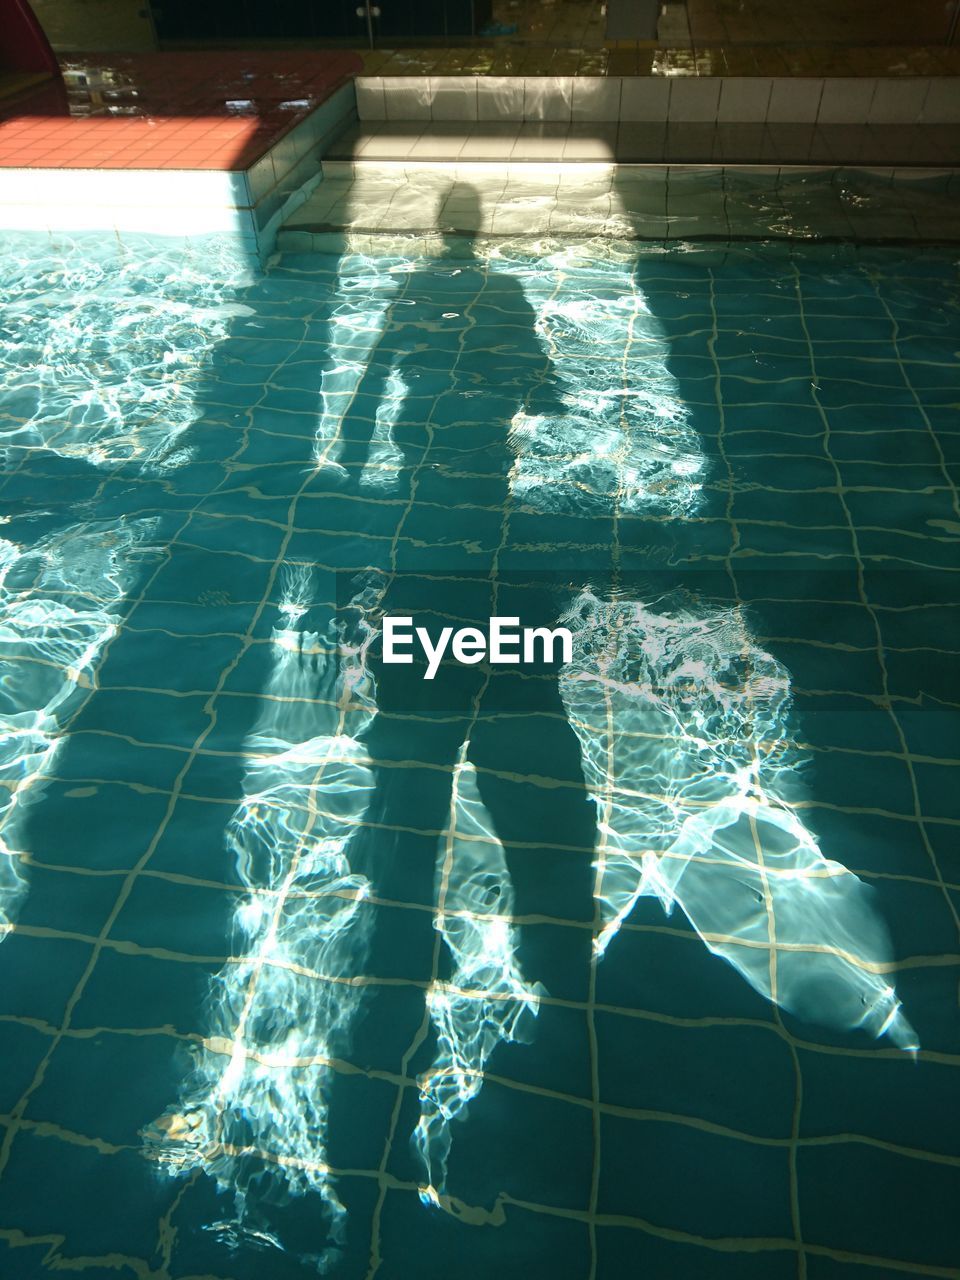 REFLECTION OF MAN SWIMMING IN POOL